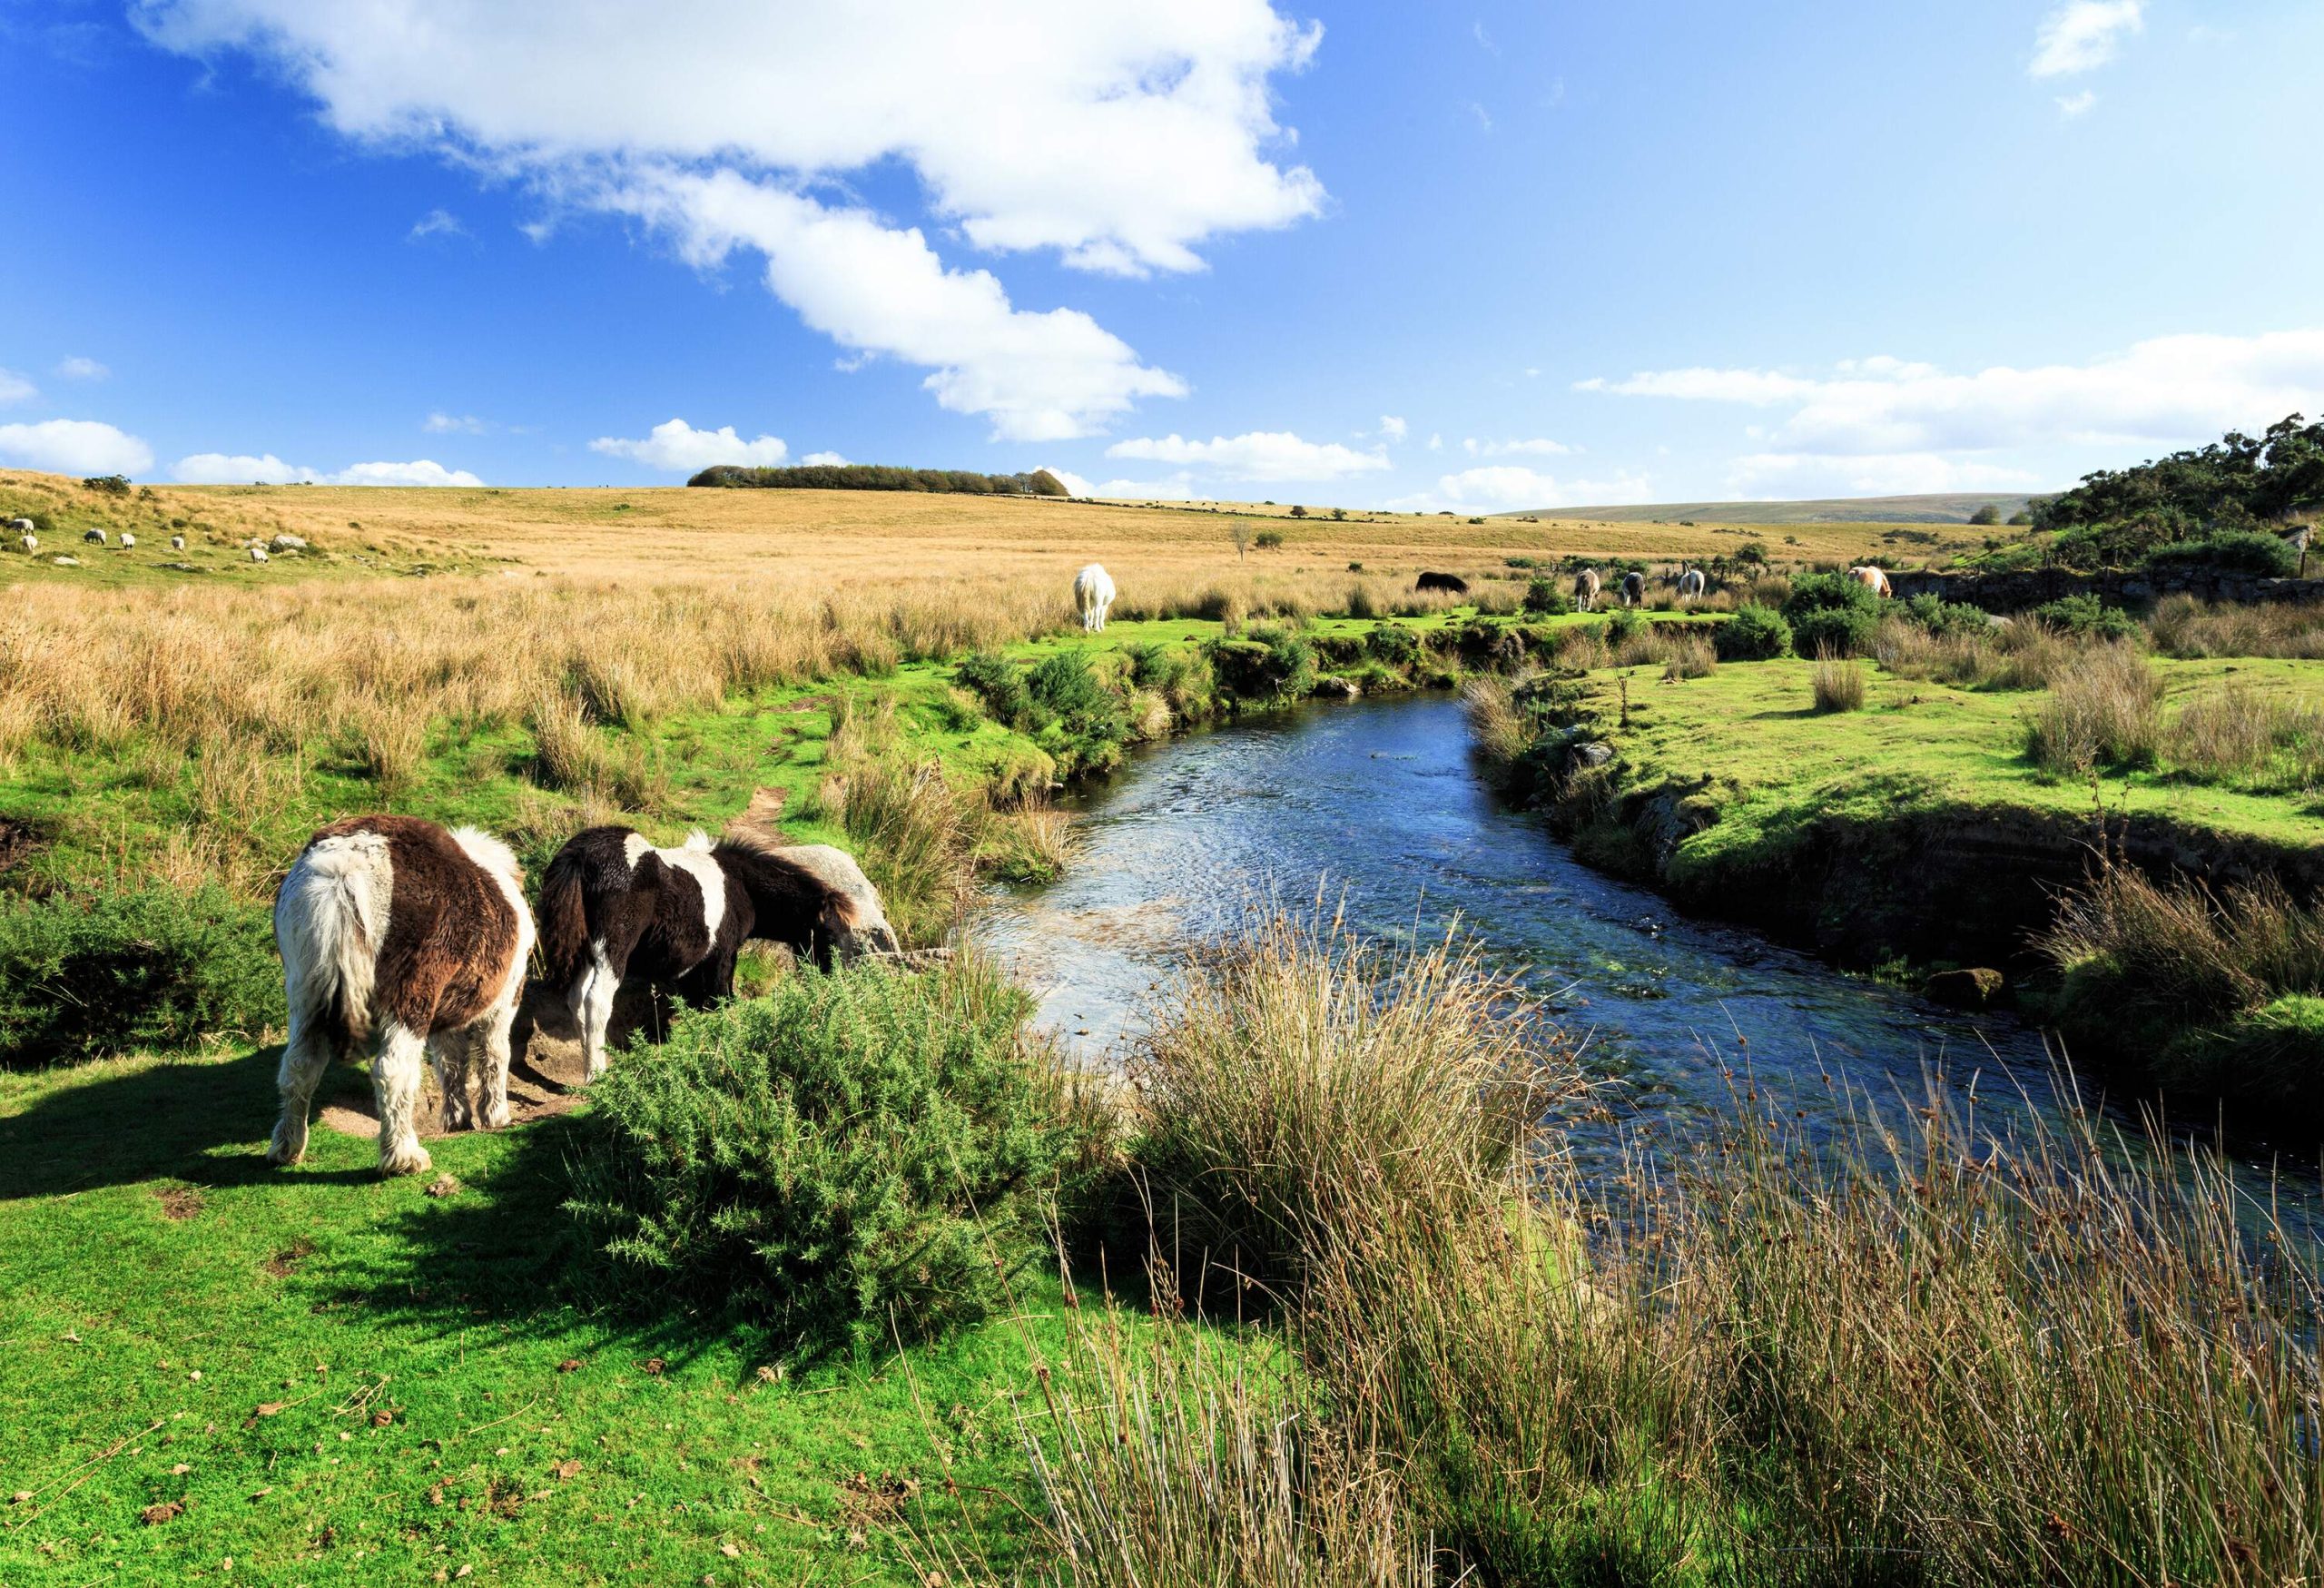 Several animals in a vast grassy moorland with a river running through.